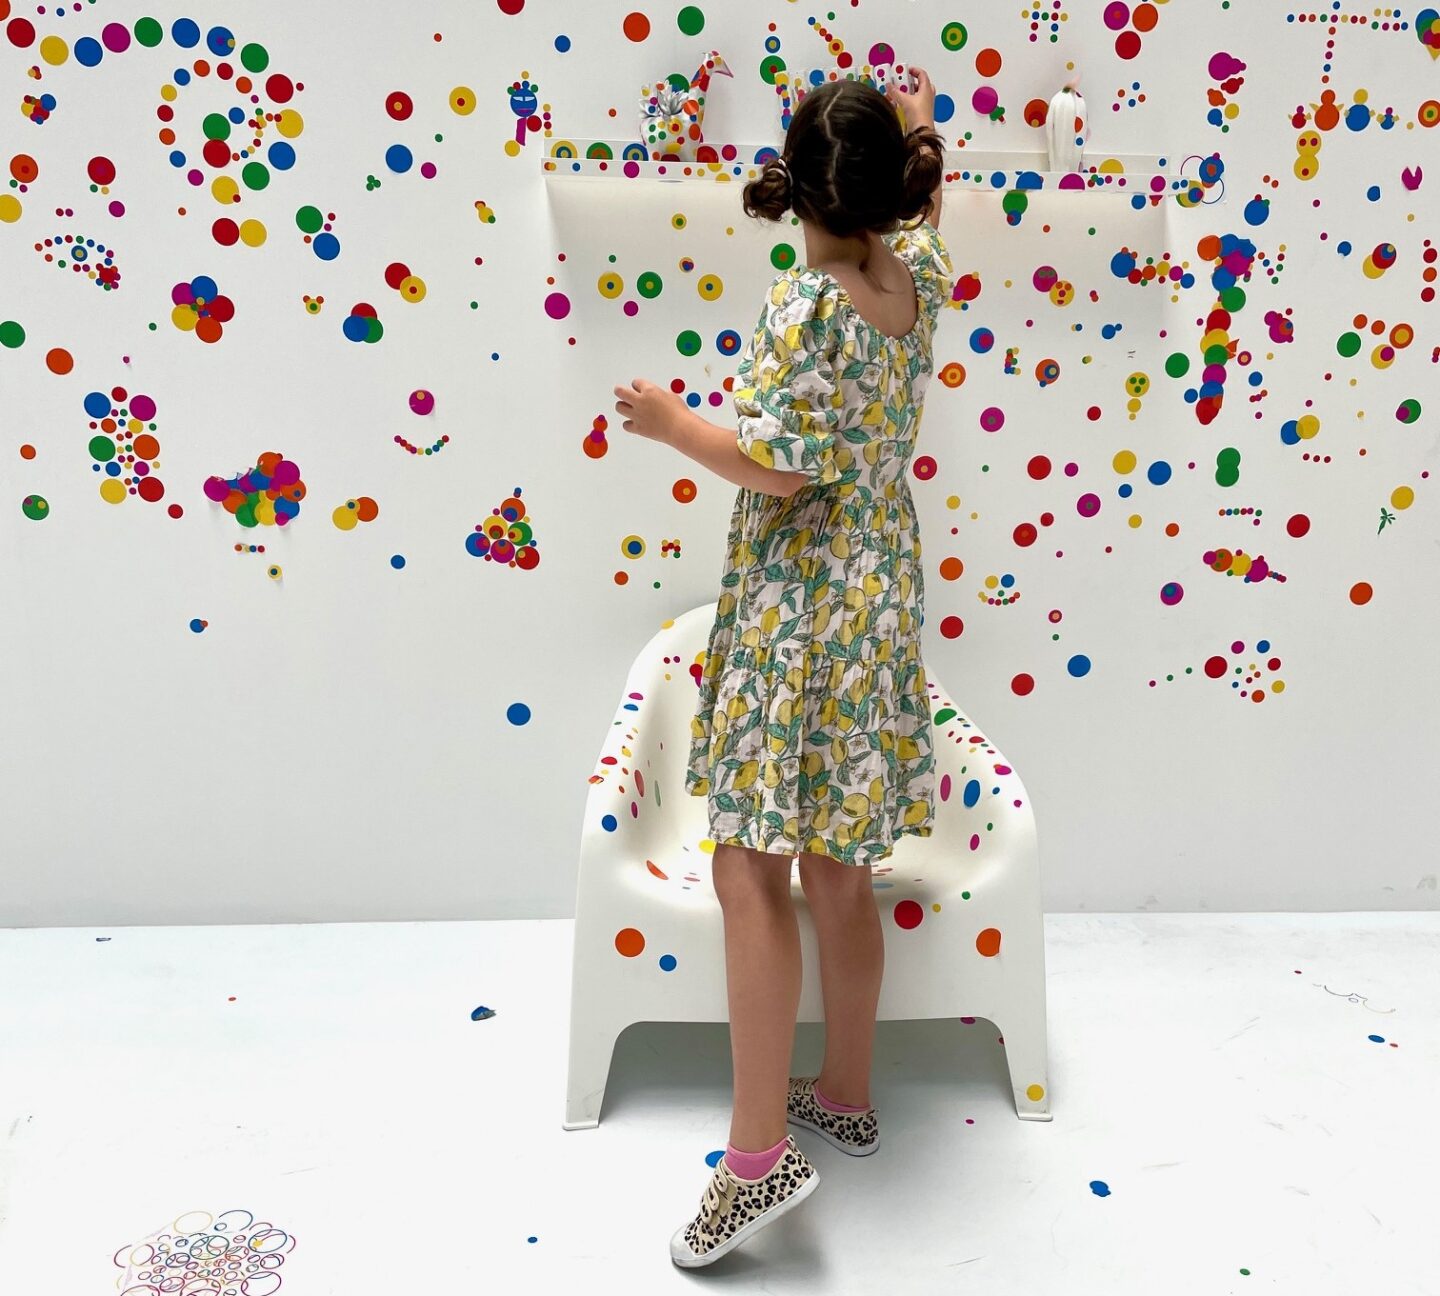 Sticky fun at Tate Modern this summer